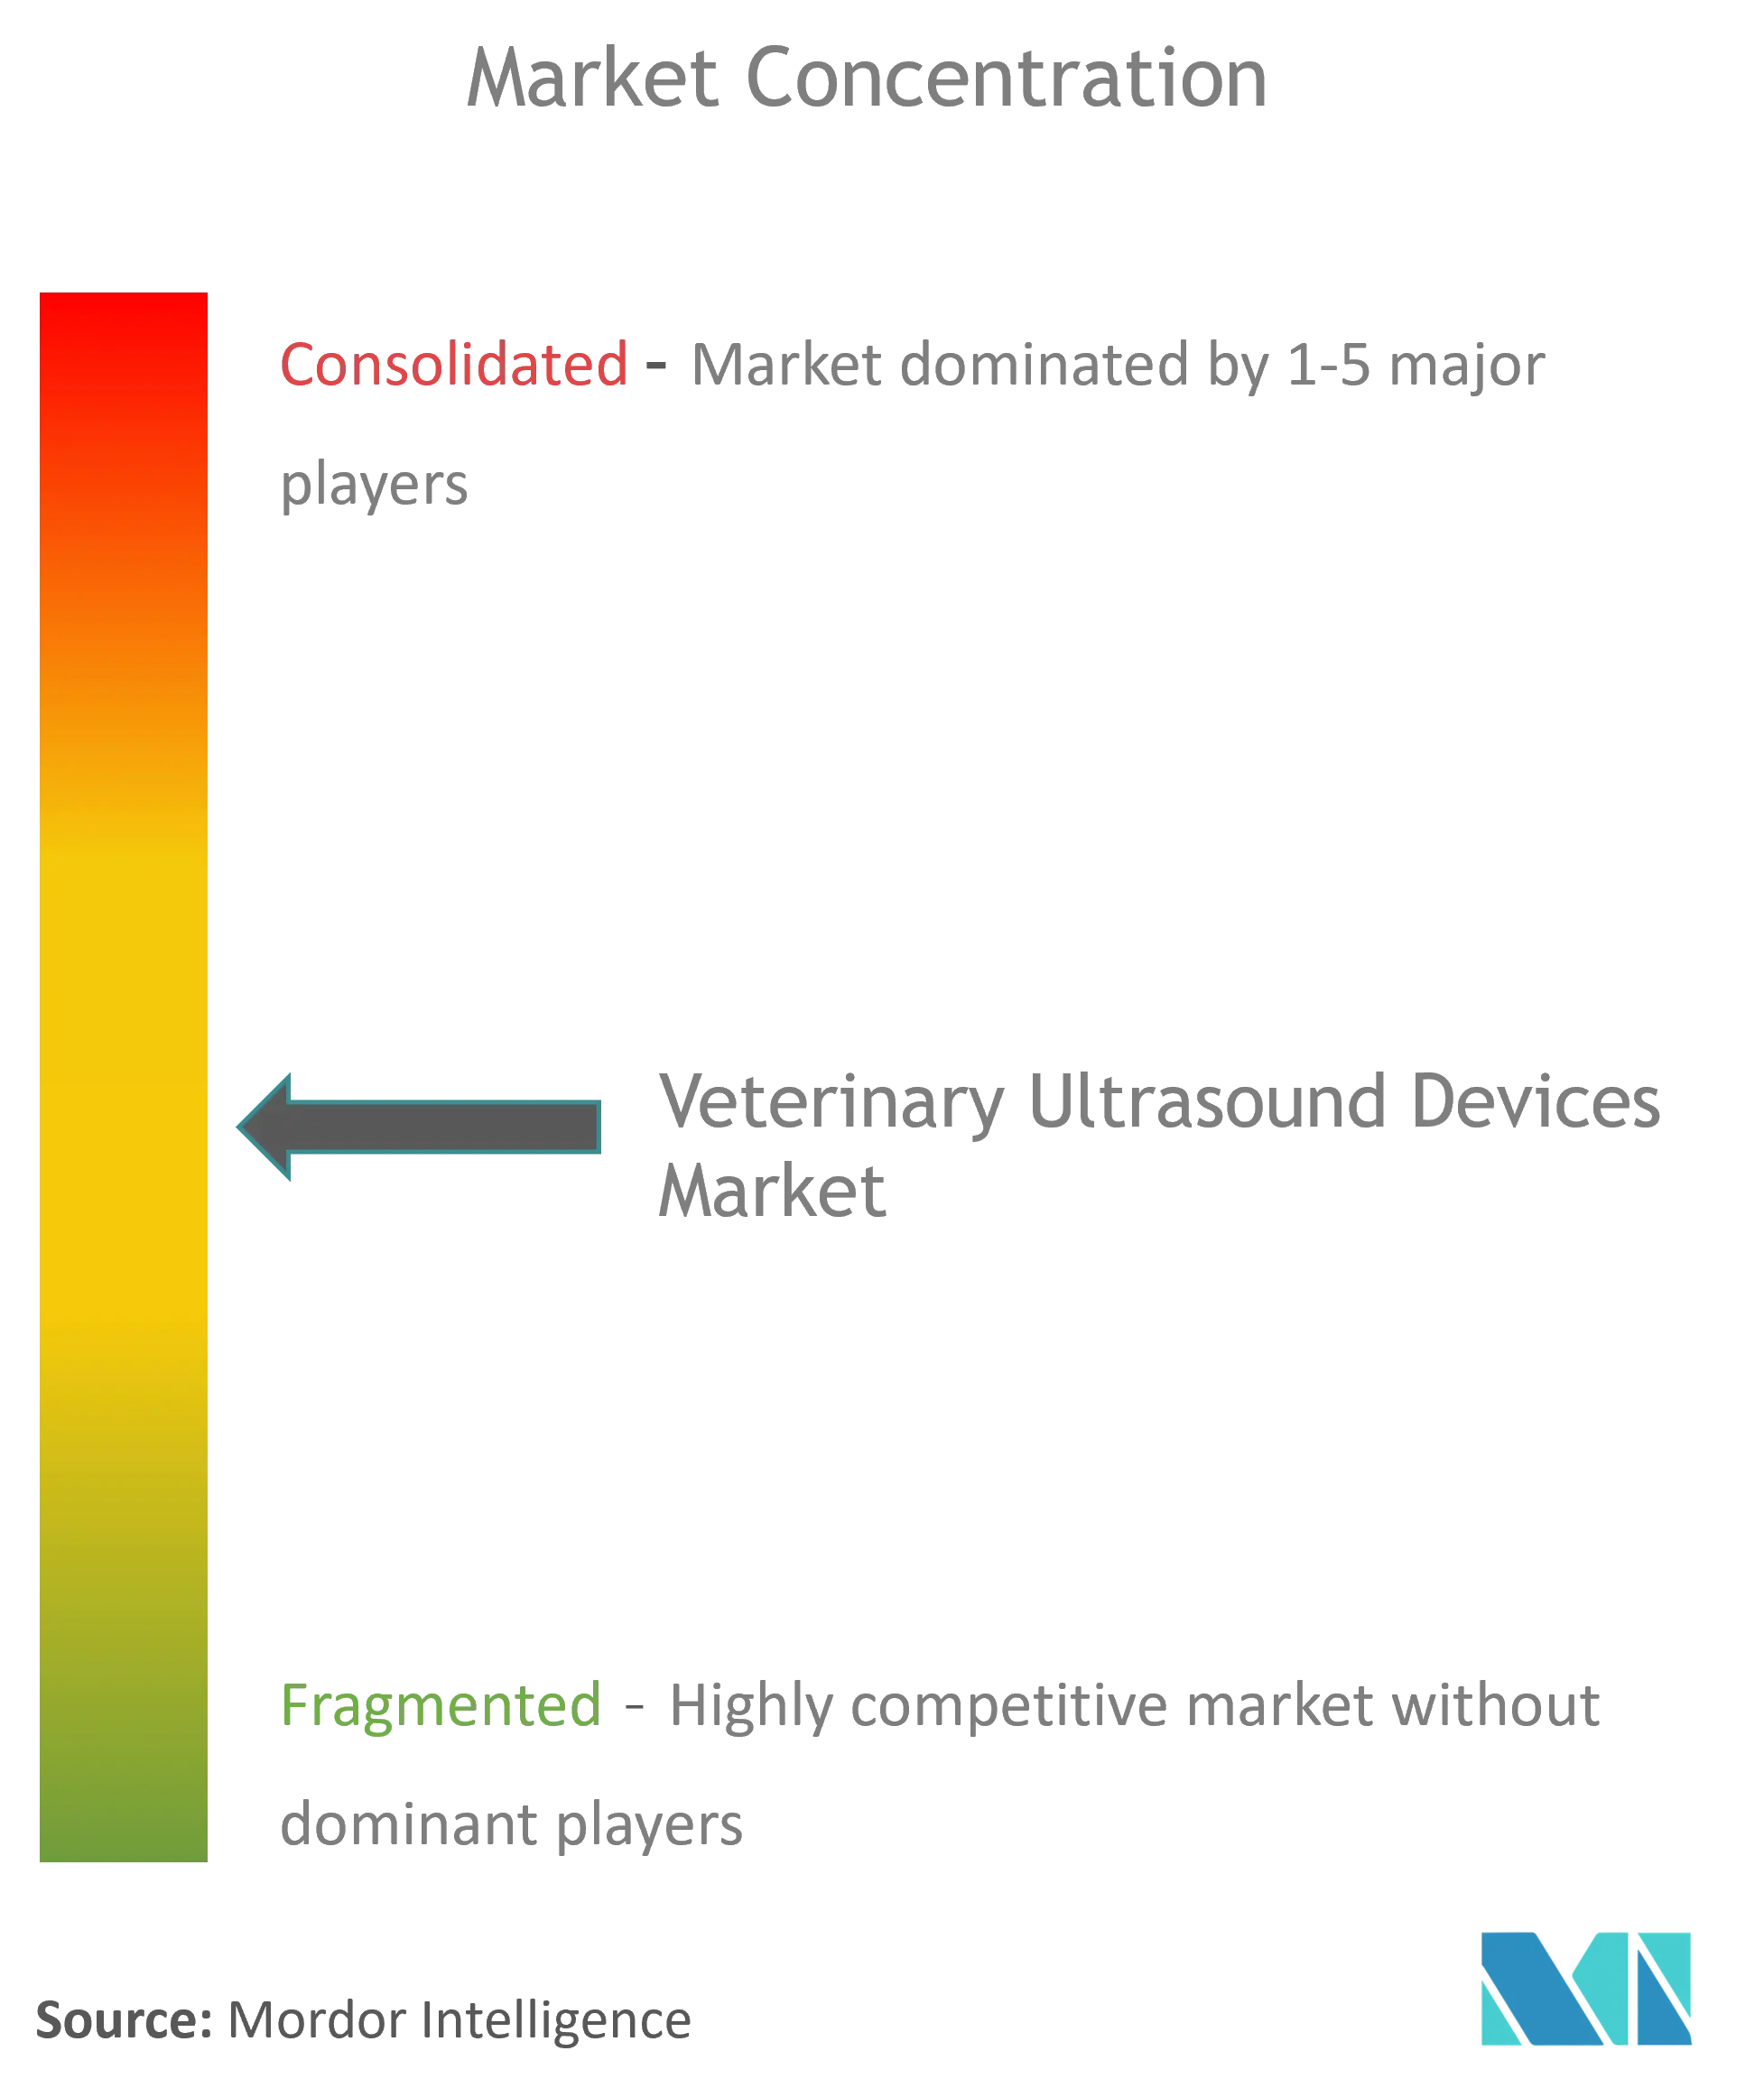 Veterinary Ultrasound Devices Market Concentration